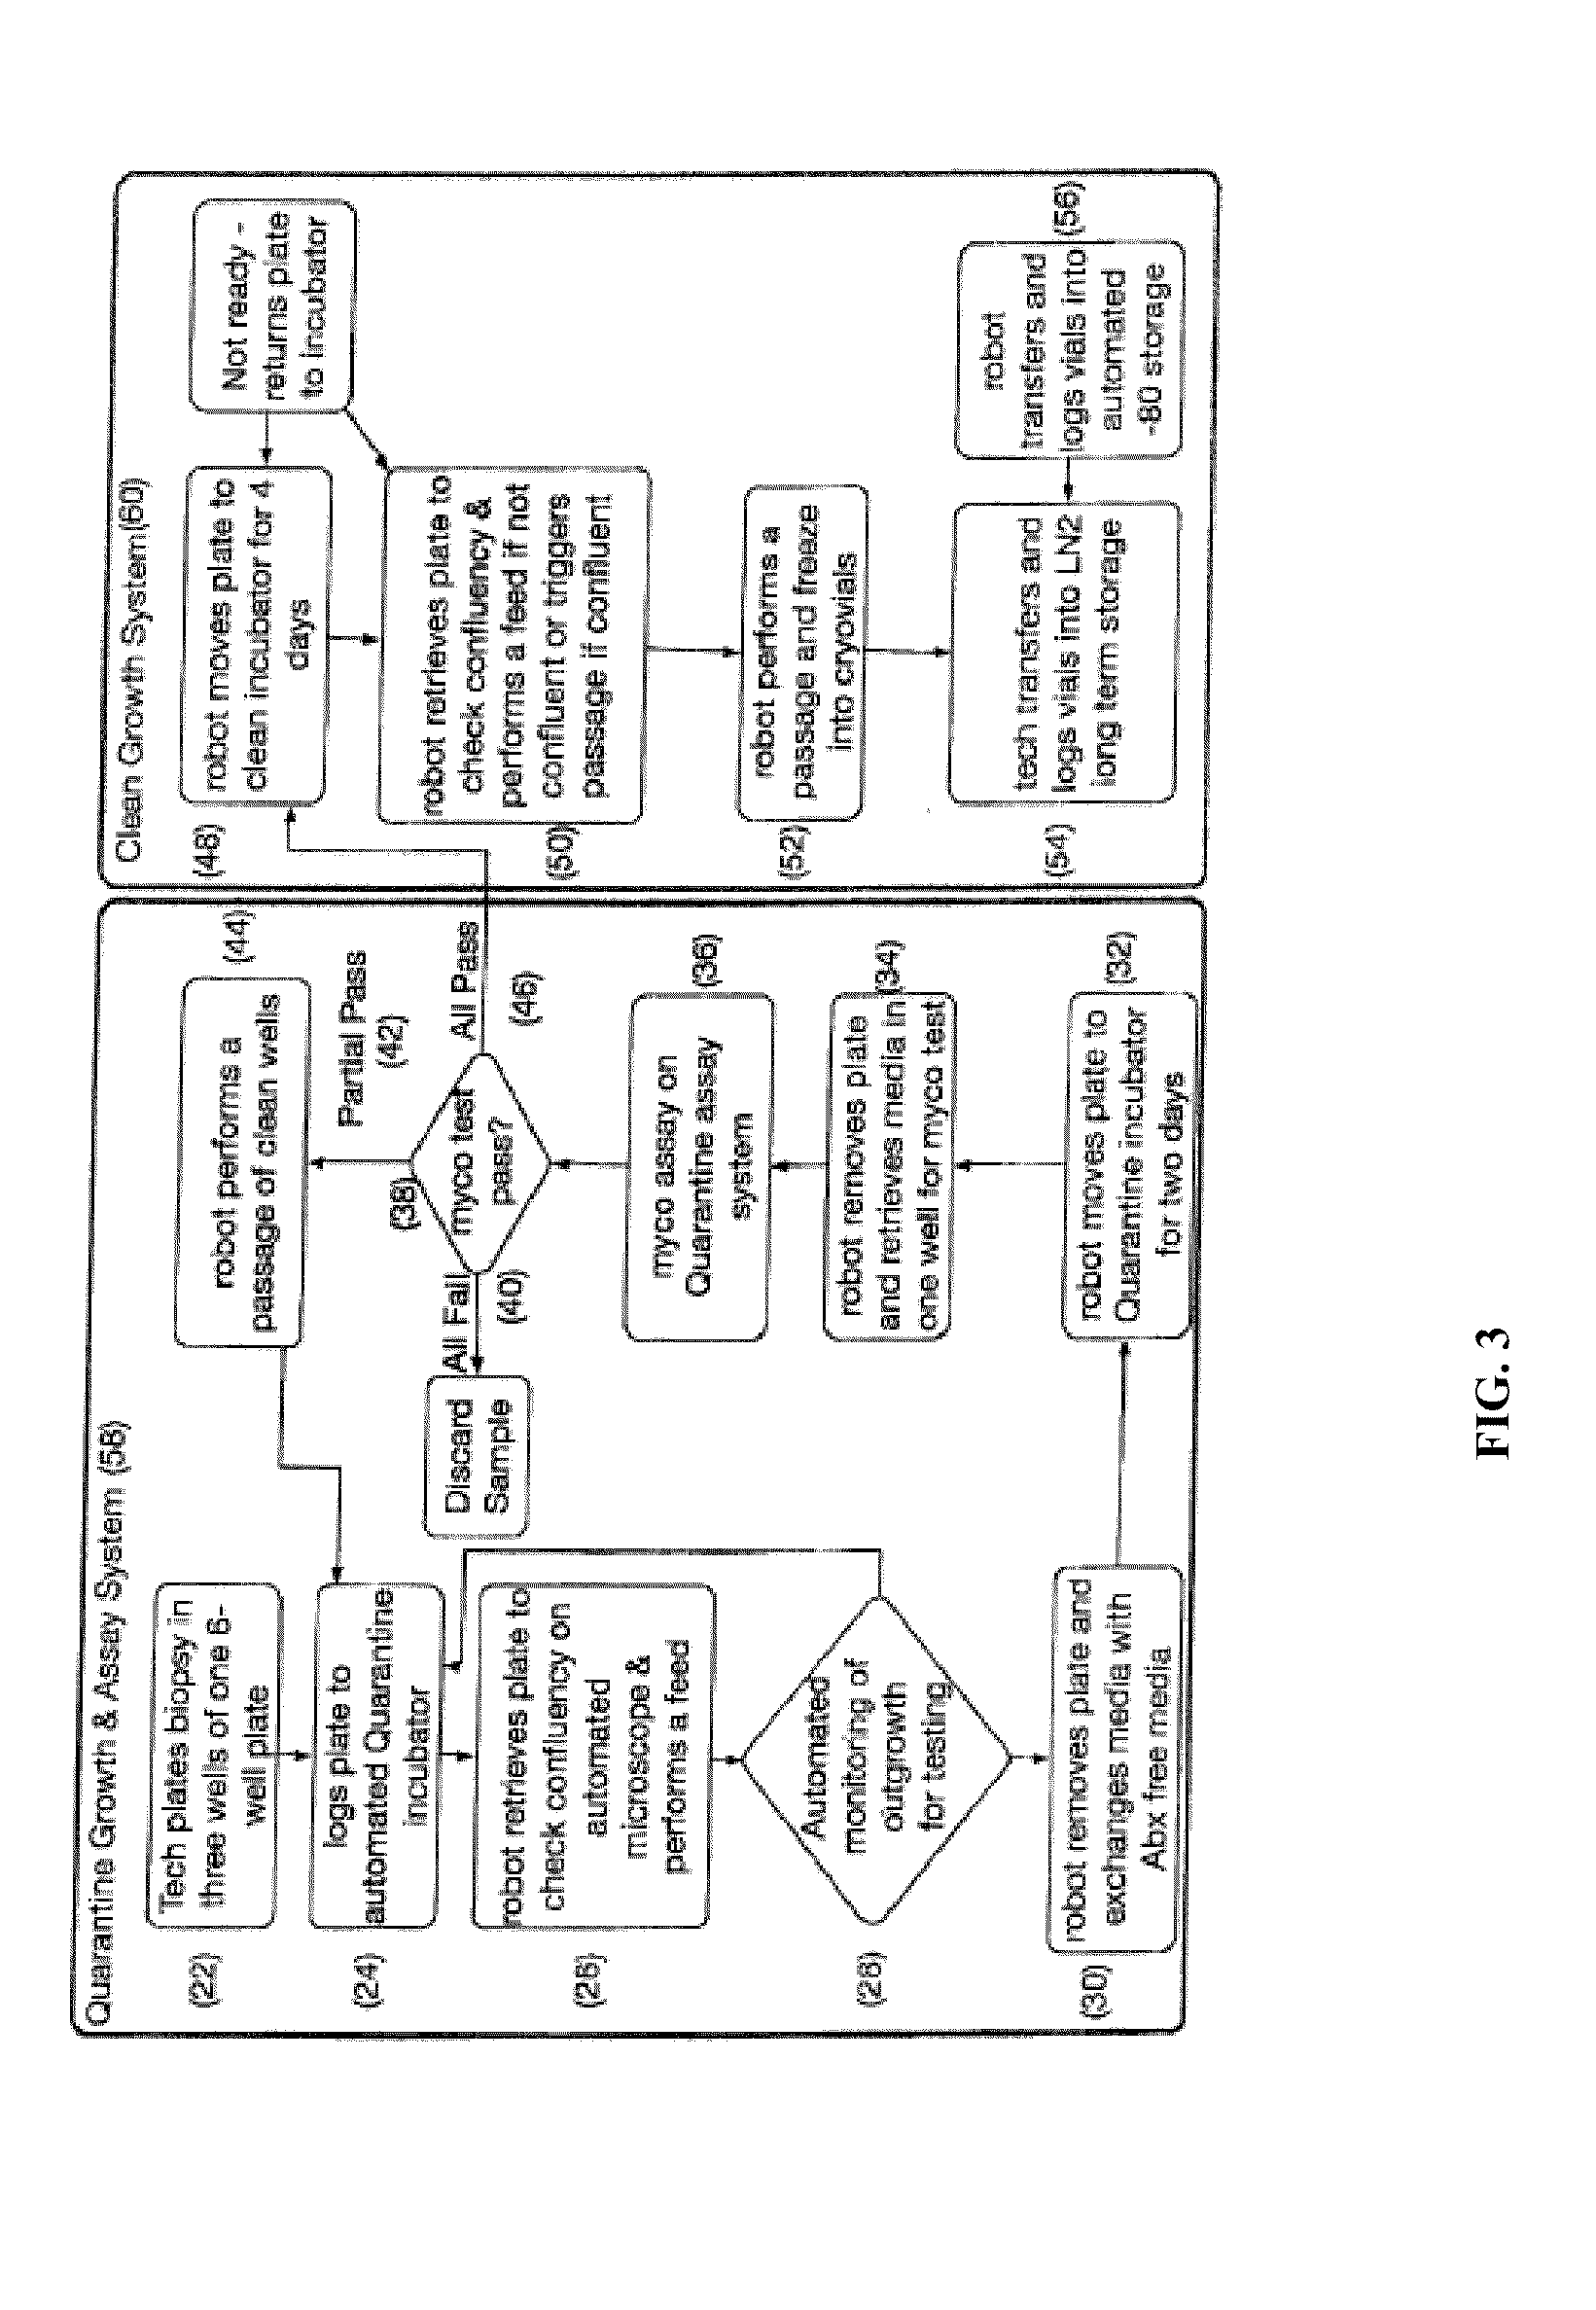 Automated system for producing induced pluripotent stem cells or differentiated cells